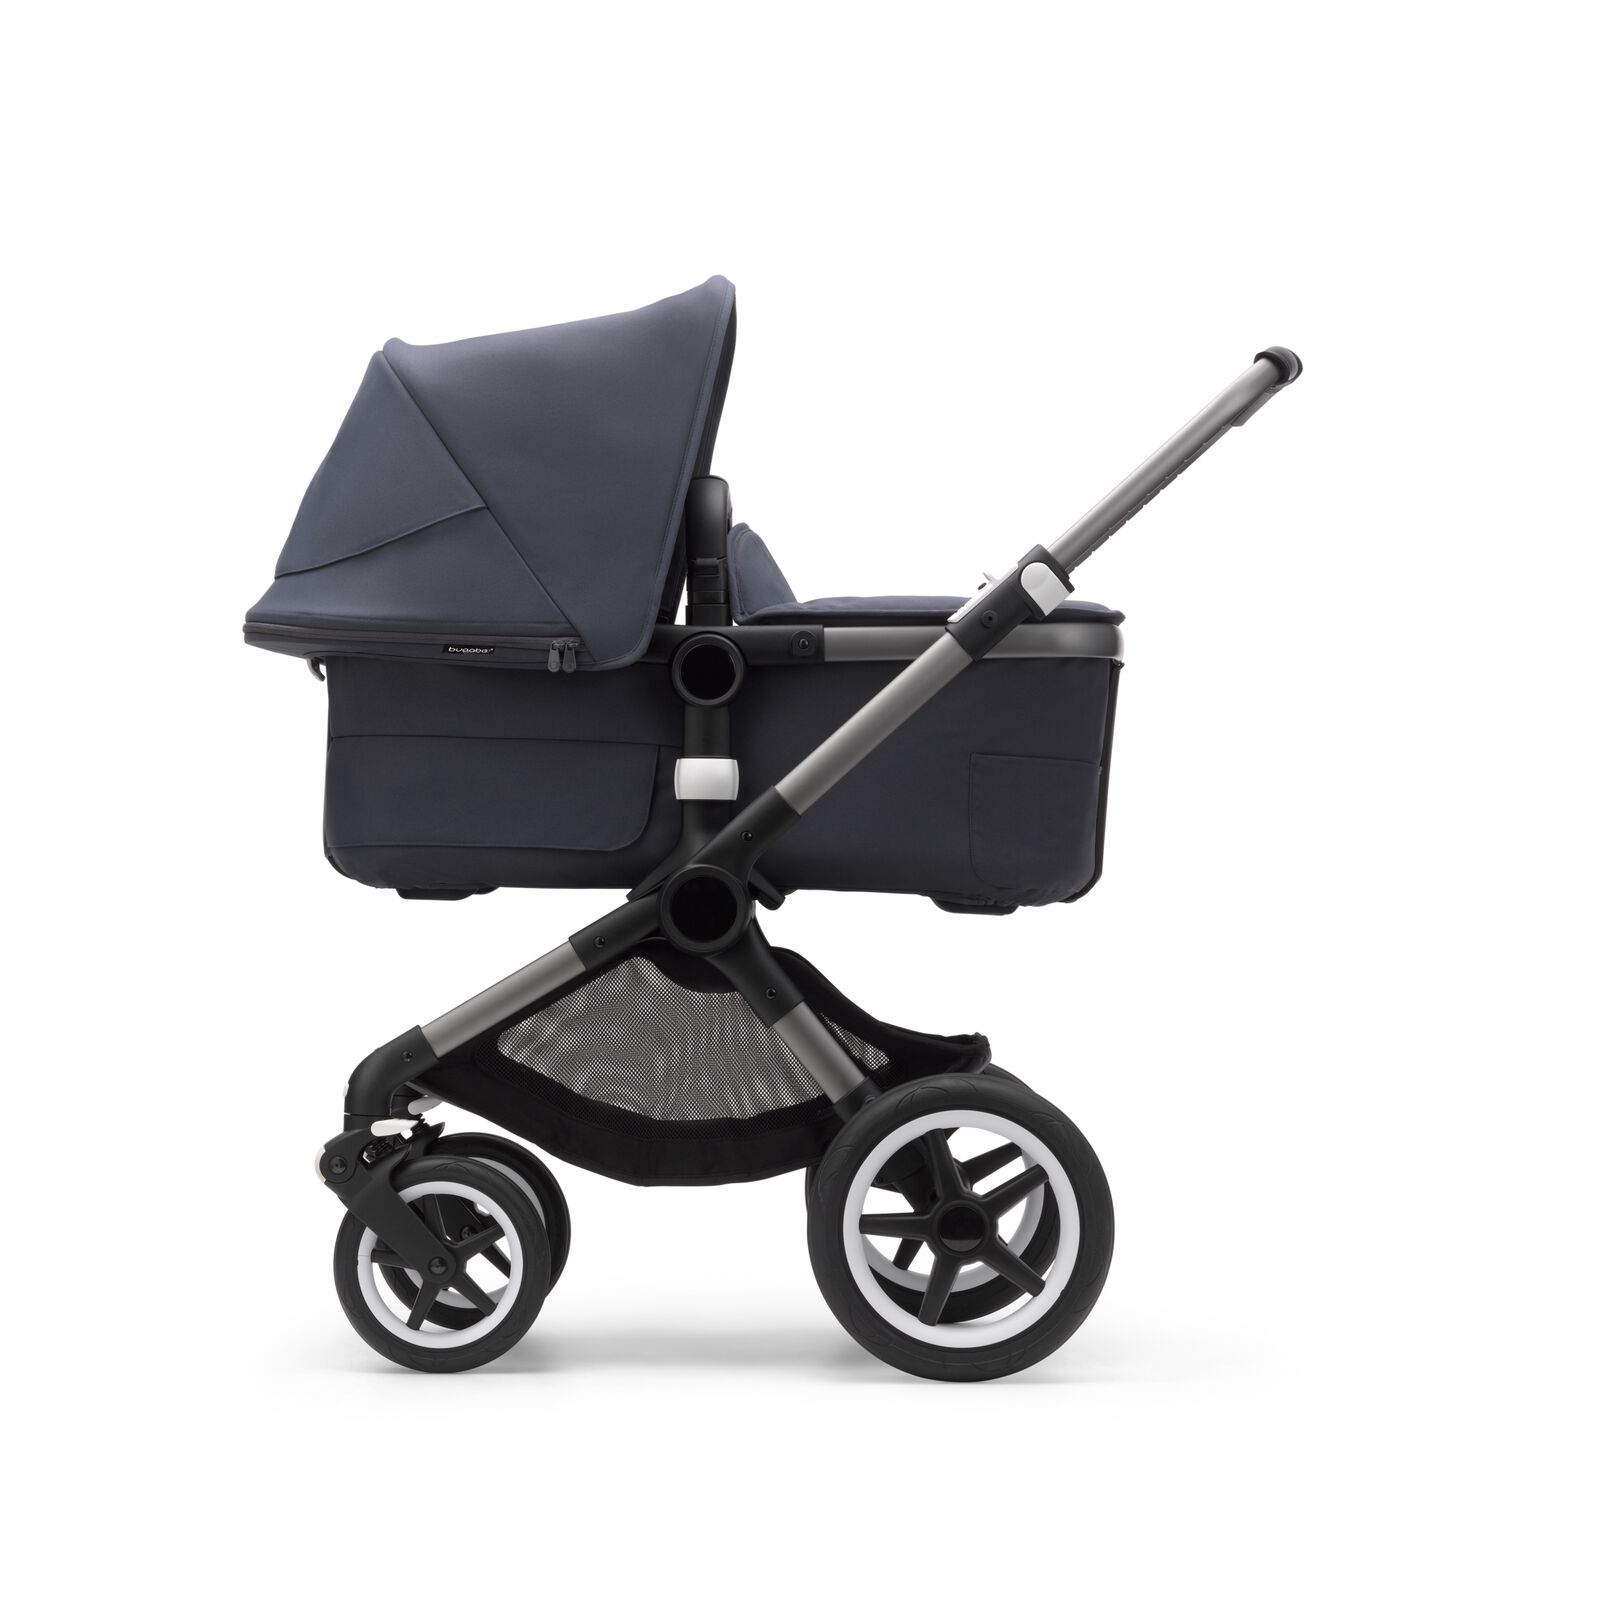 Side view of a Fox 3 bassinet stroller with graphite frame, stormy blue fabrics and stormy blue sun canopy.